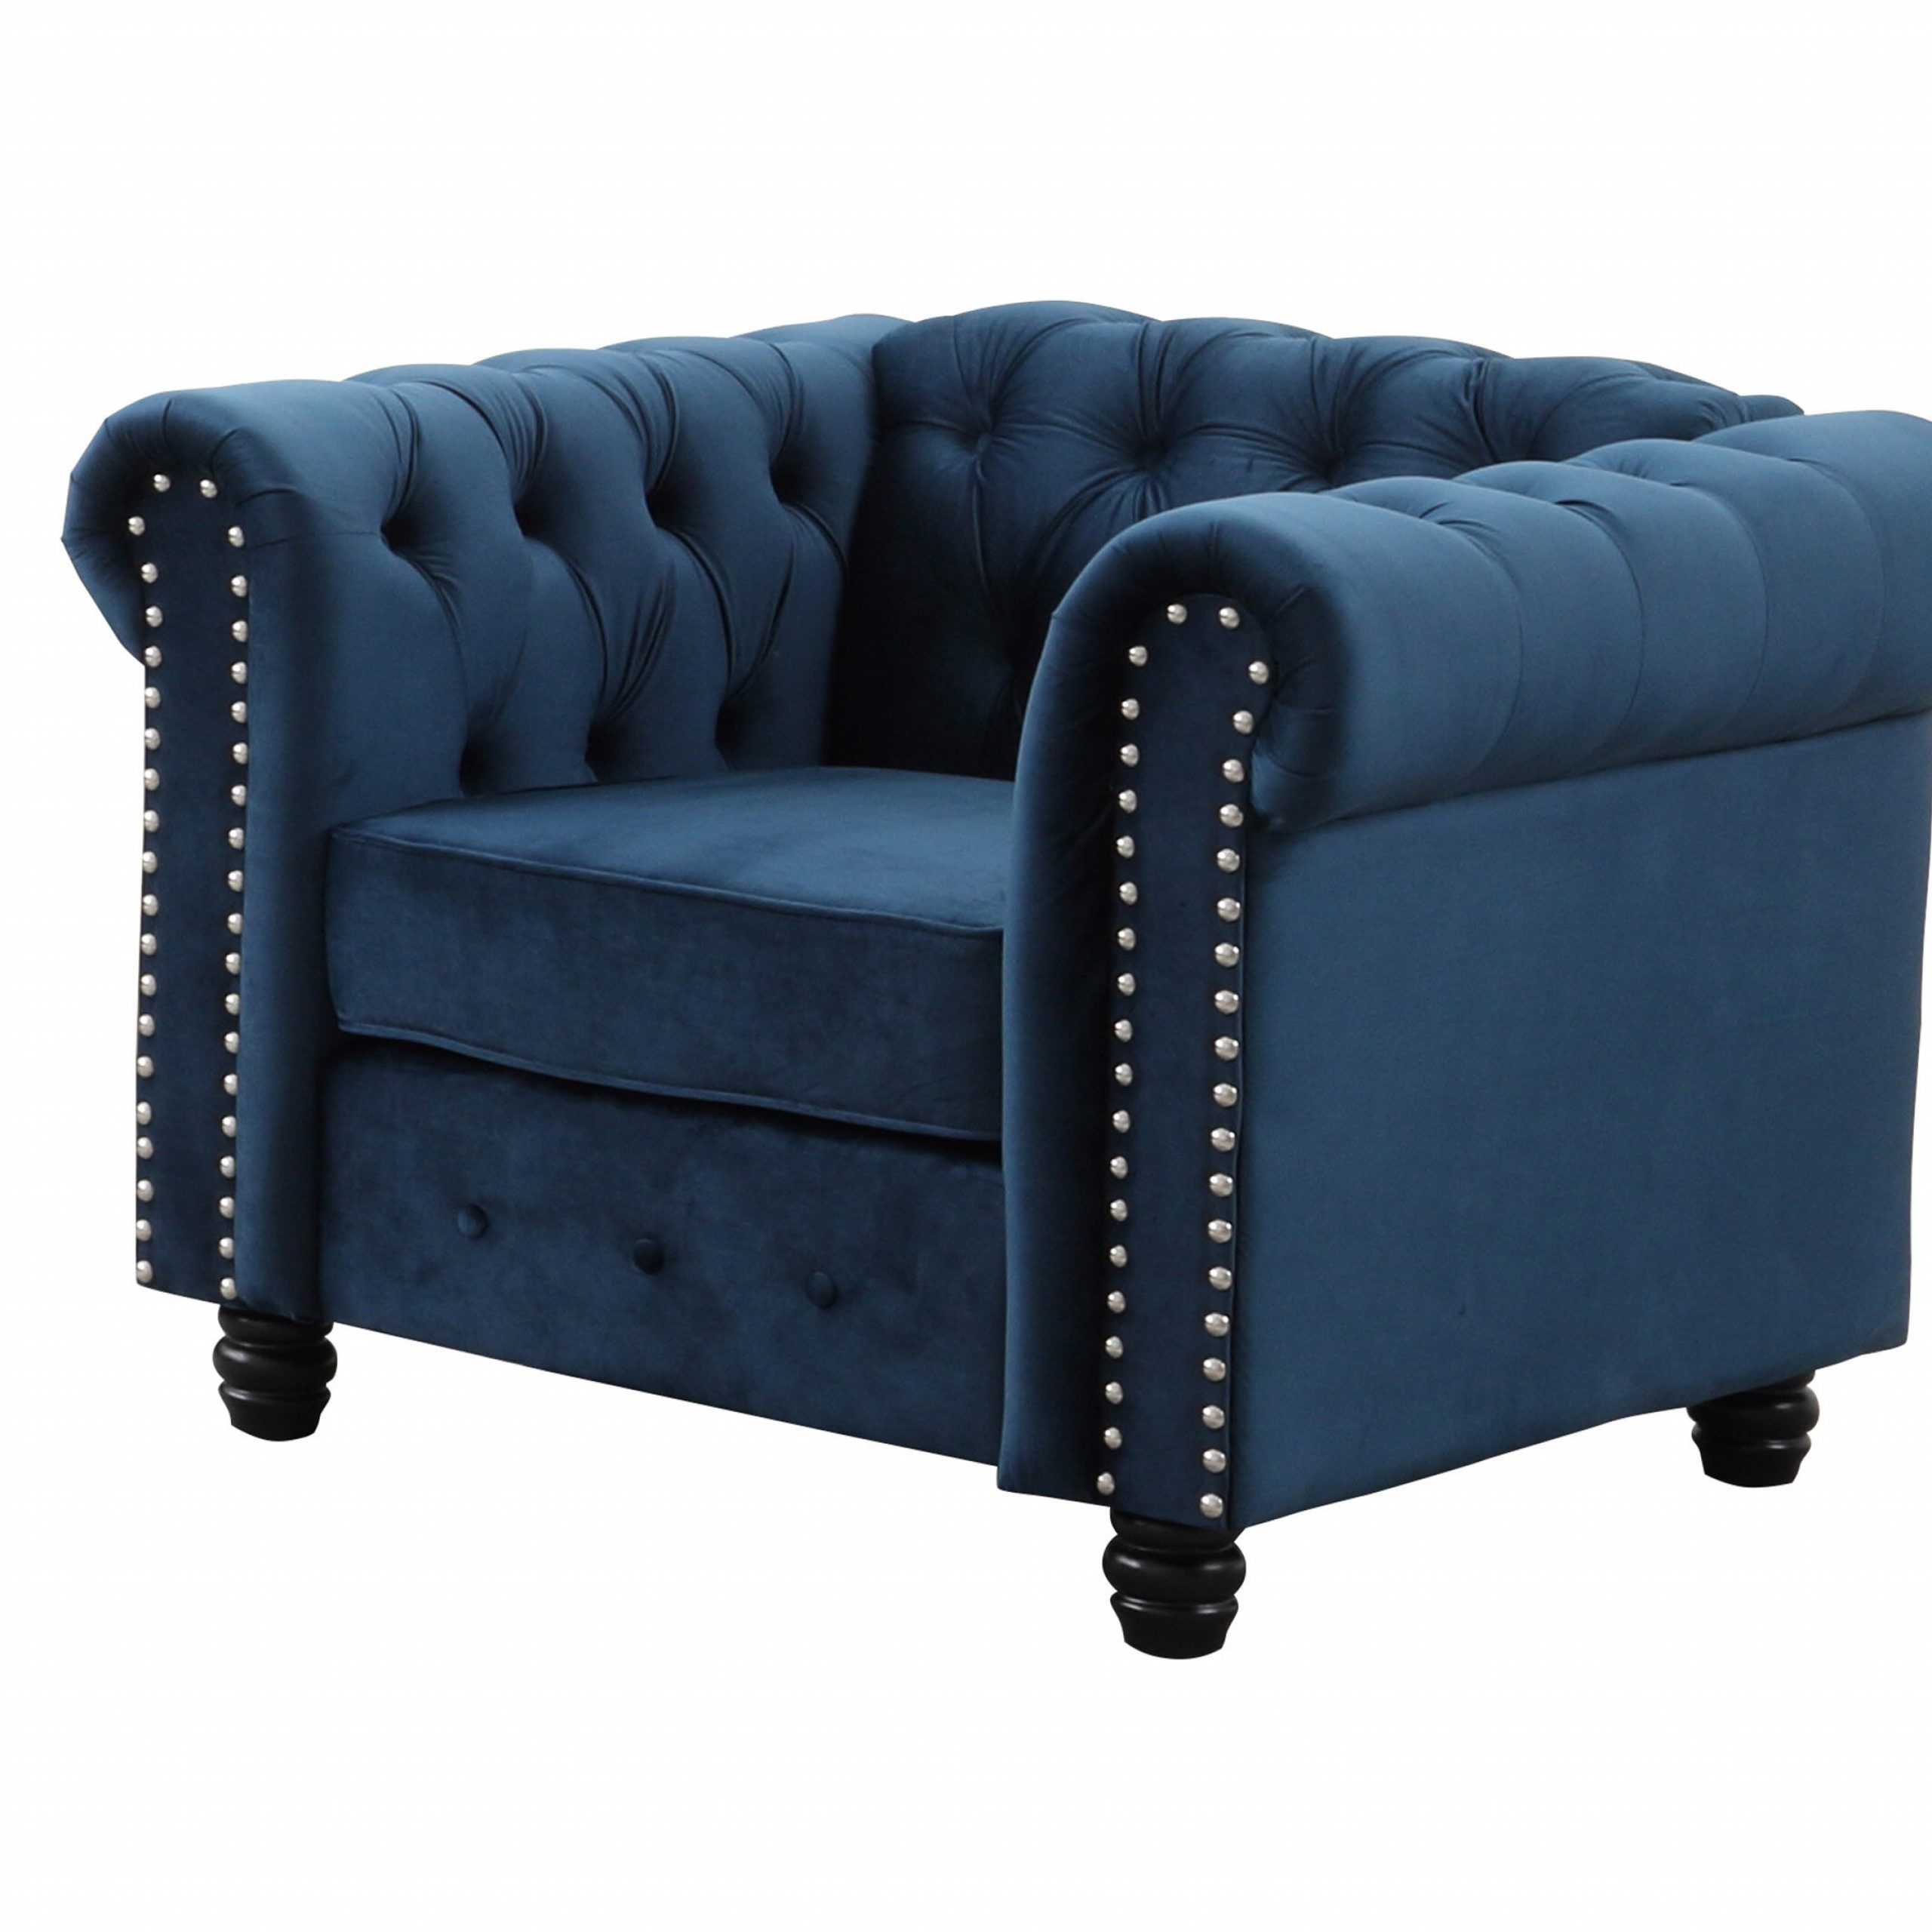 Ys001 35'' W Tufted Velvet Armchair With Belz Tufted Polyester Armchairs (View 9 of 15)